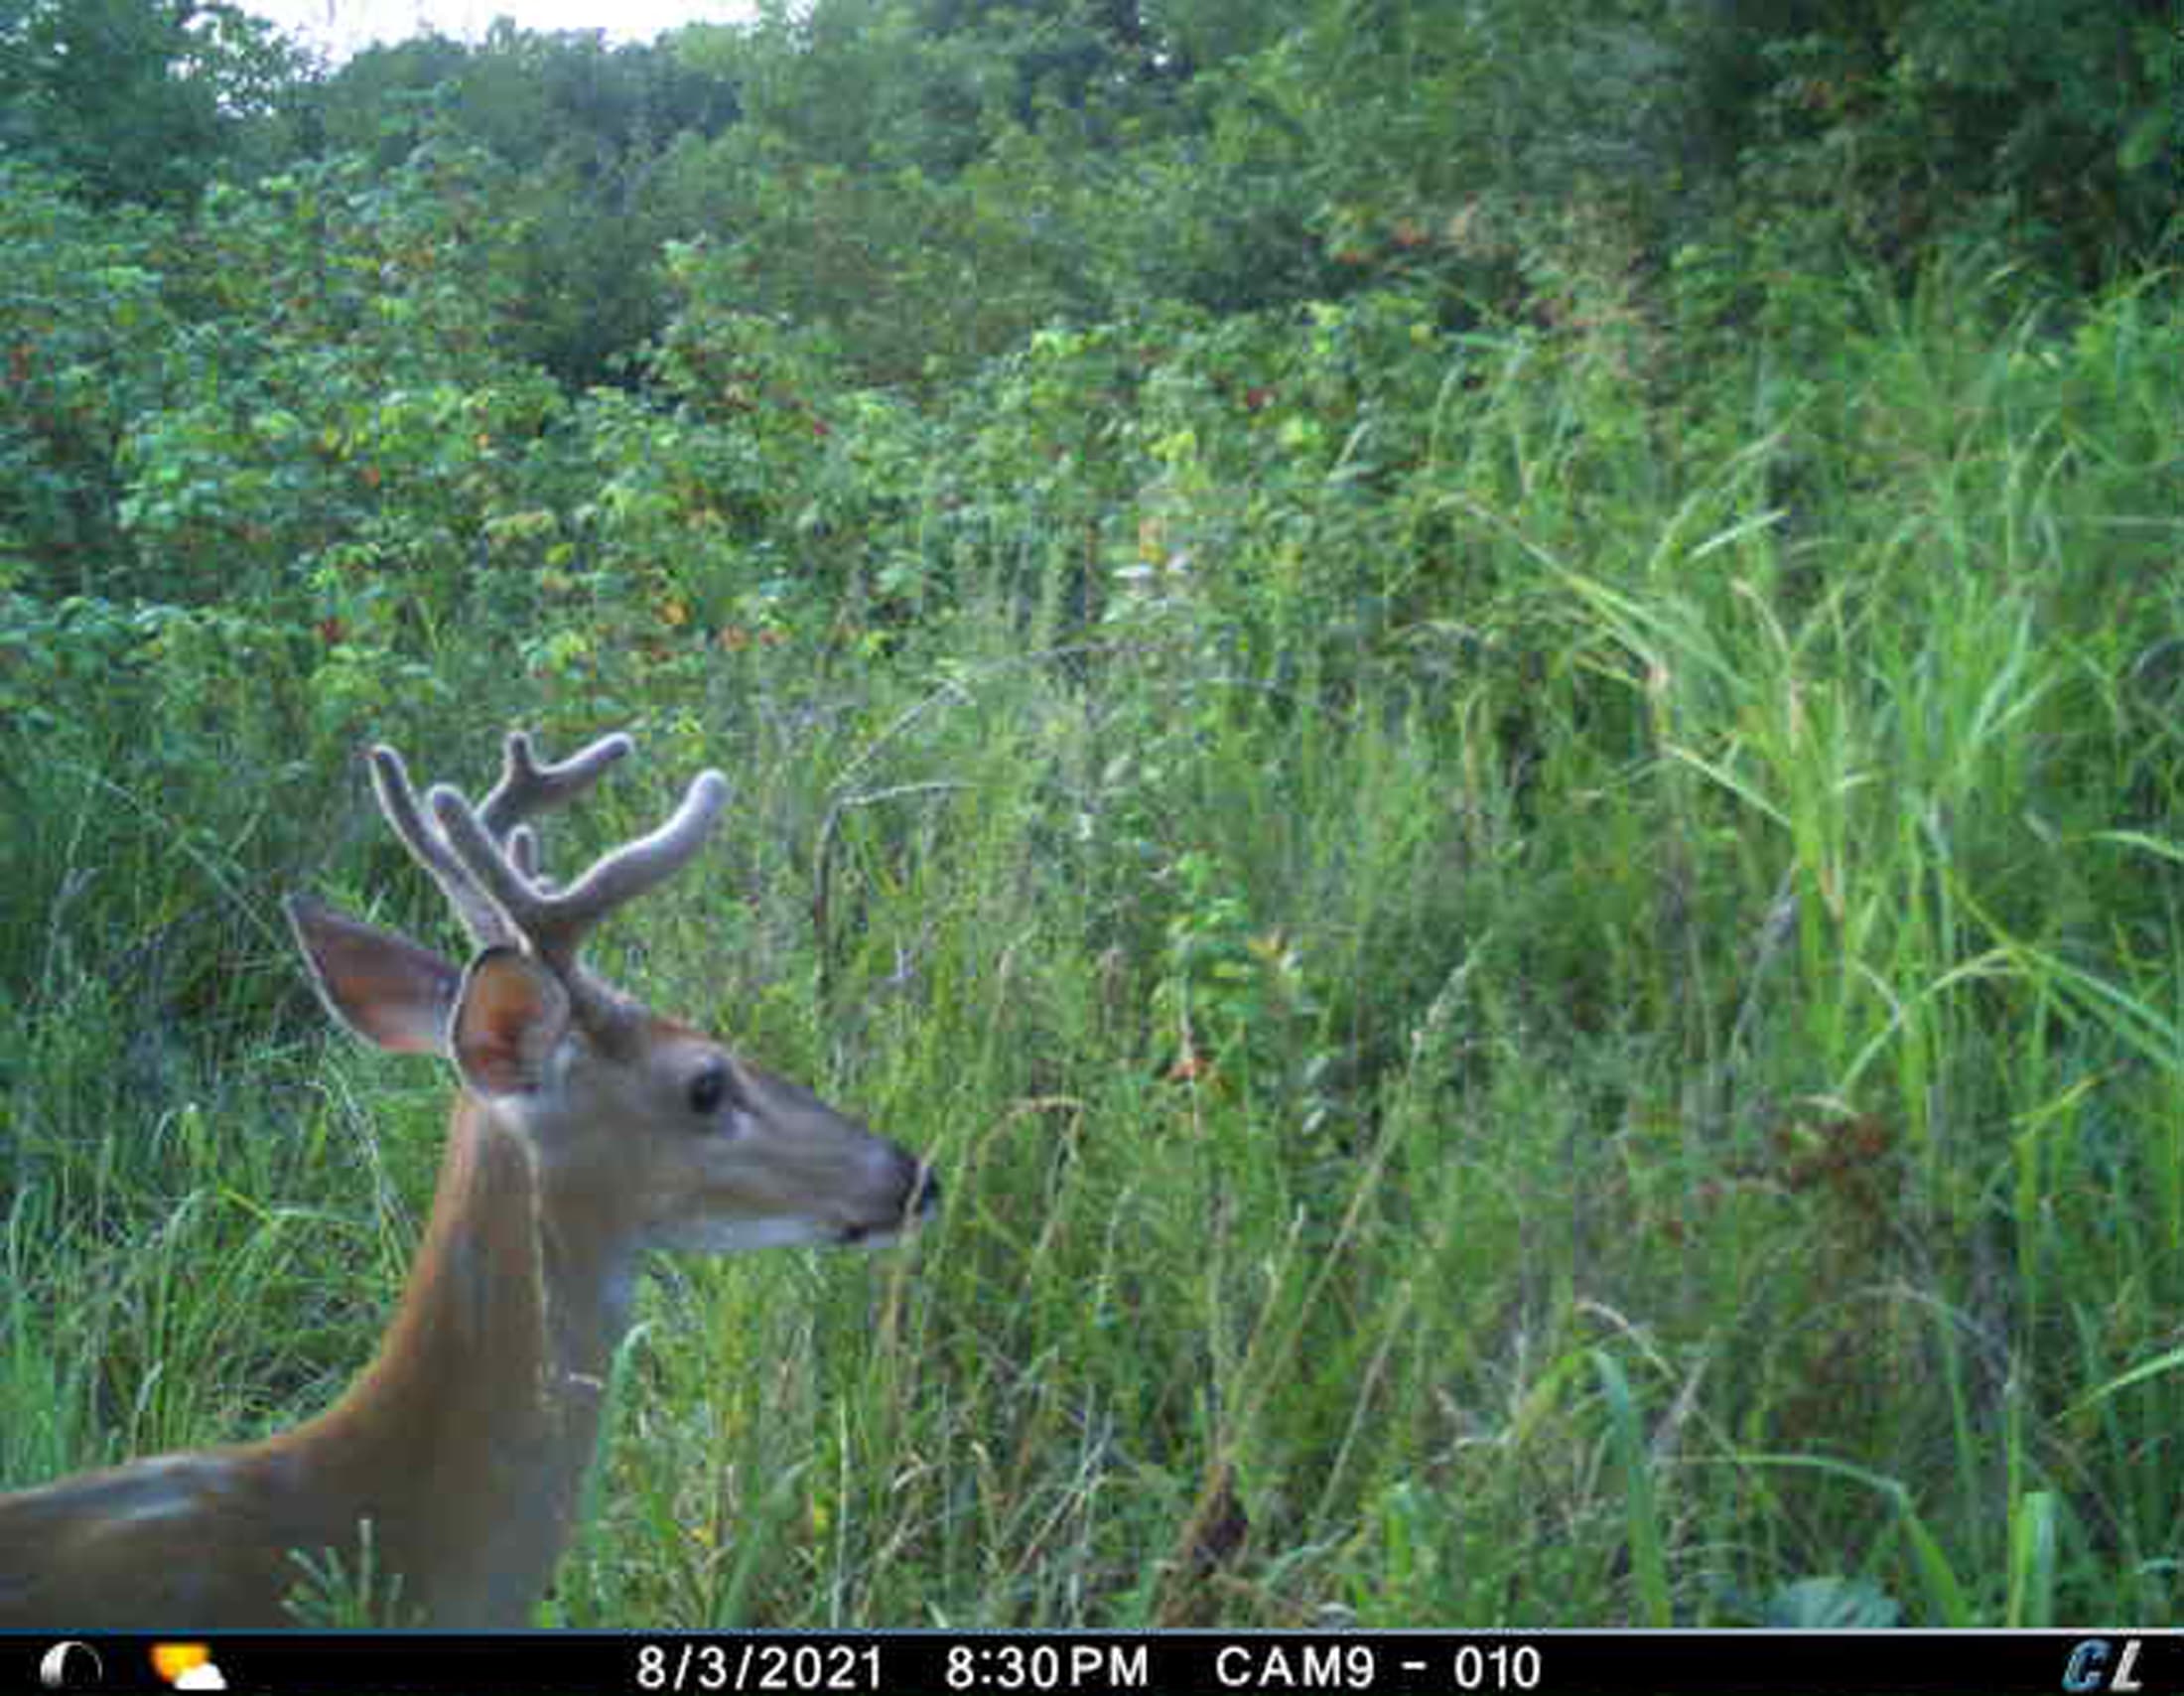 best way to view trail cam pics in the field